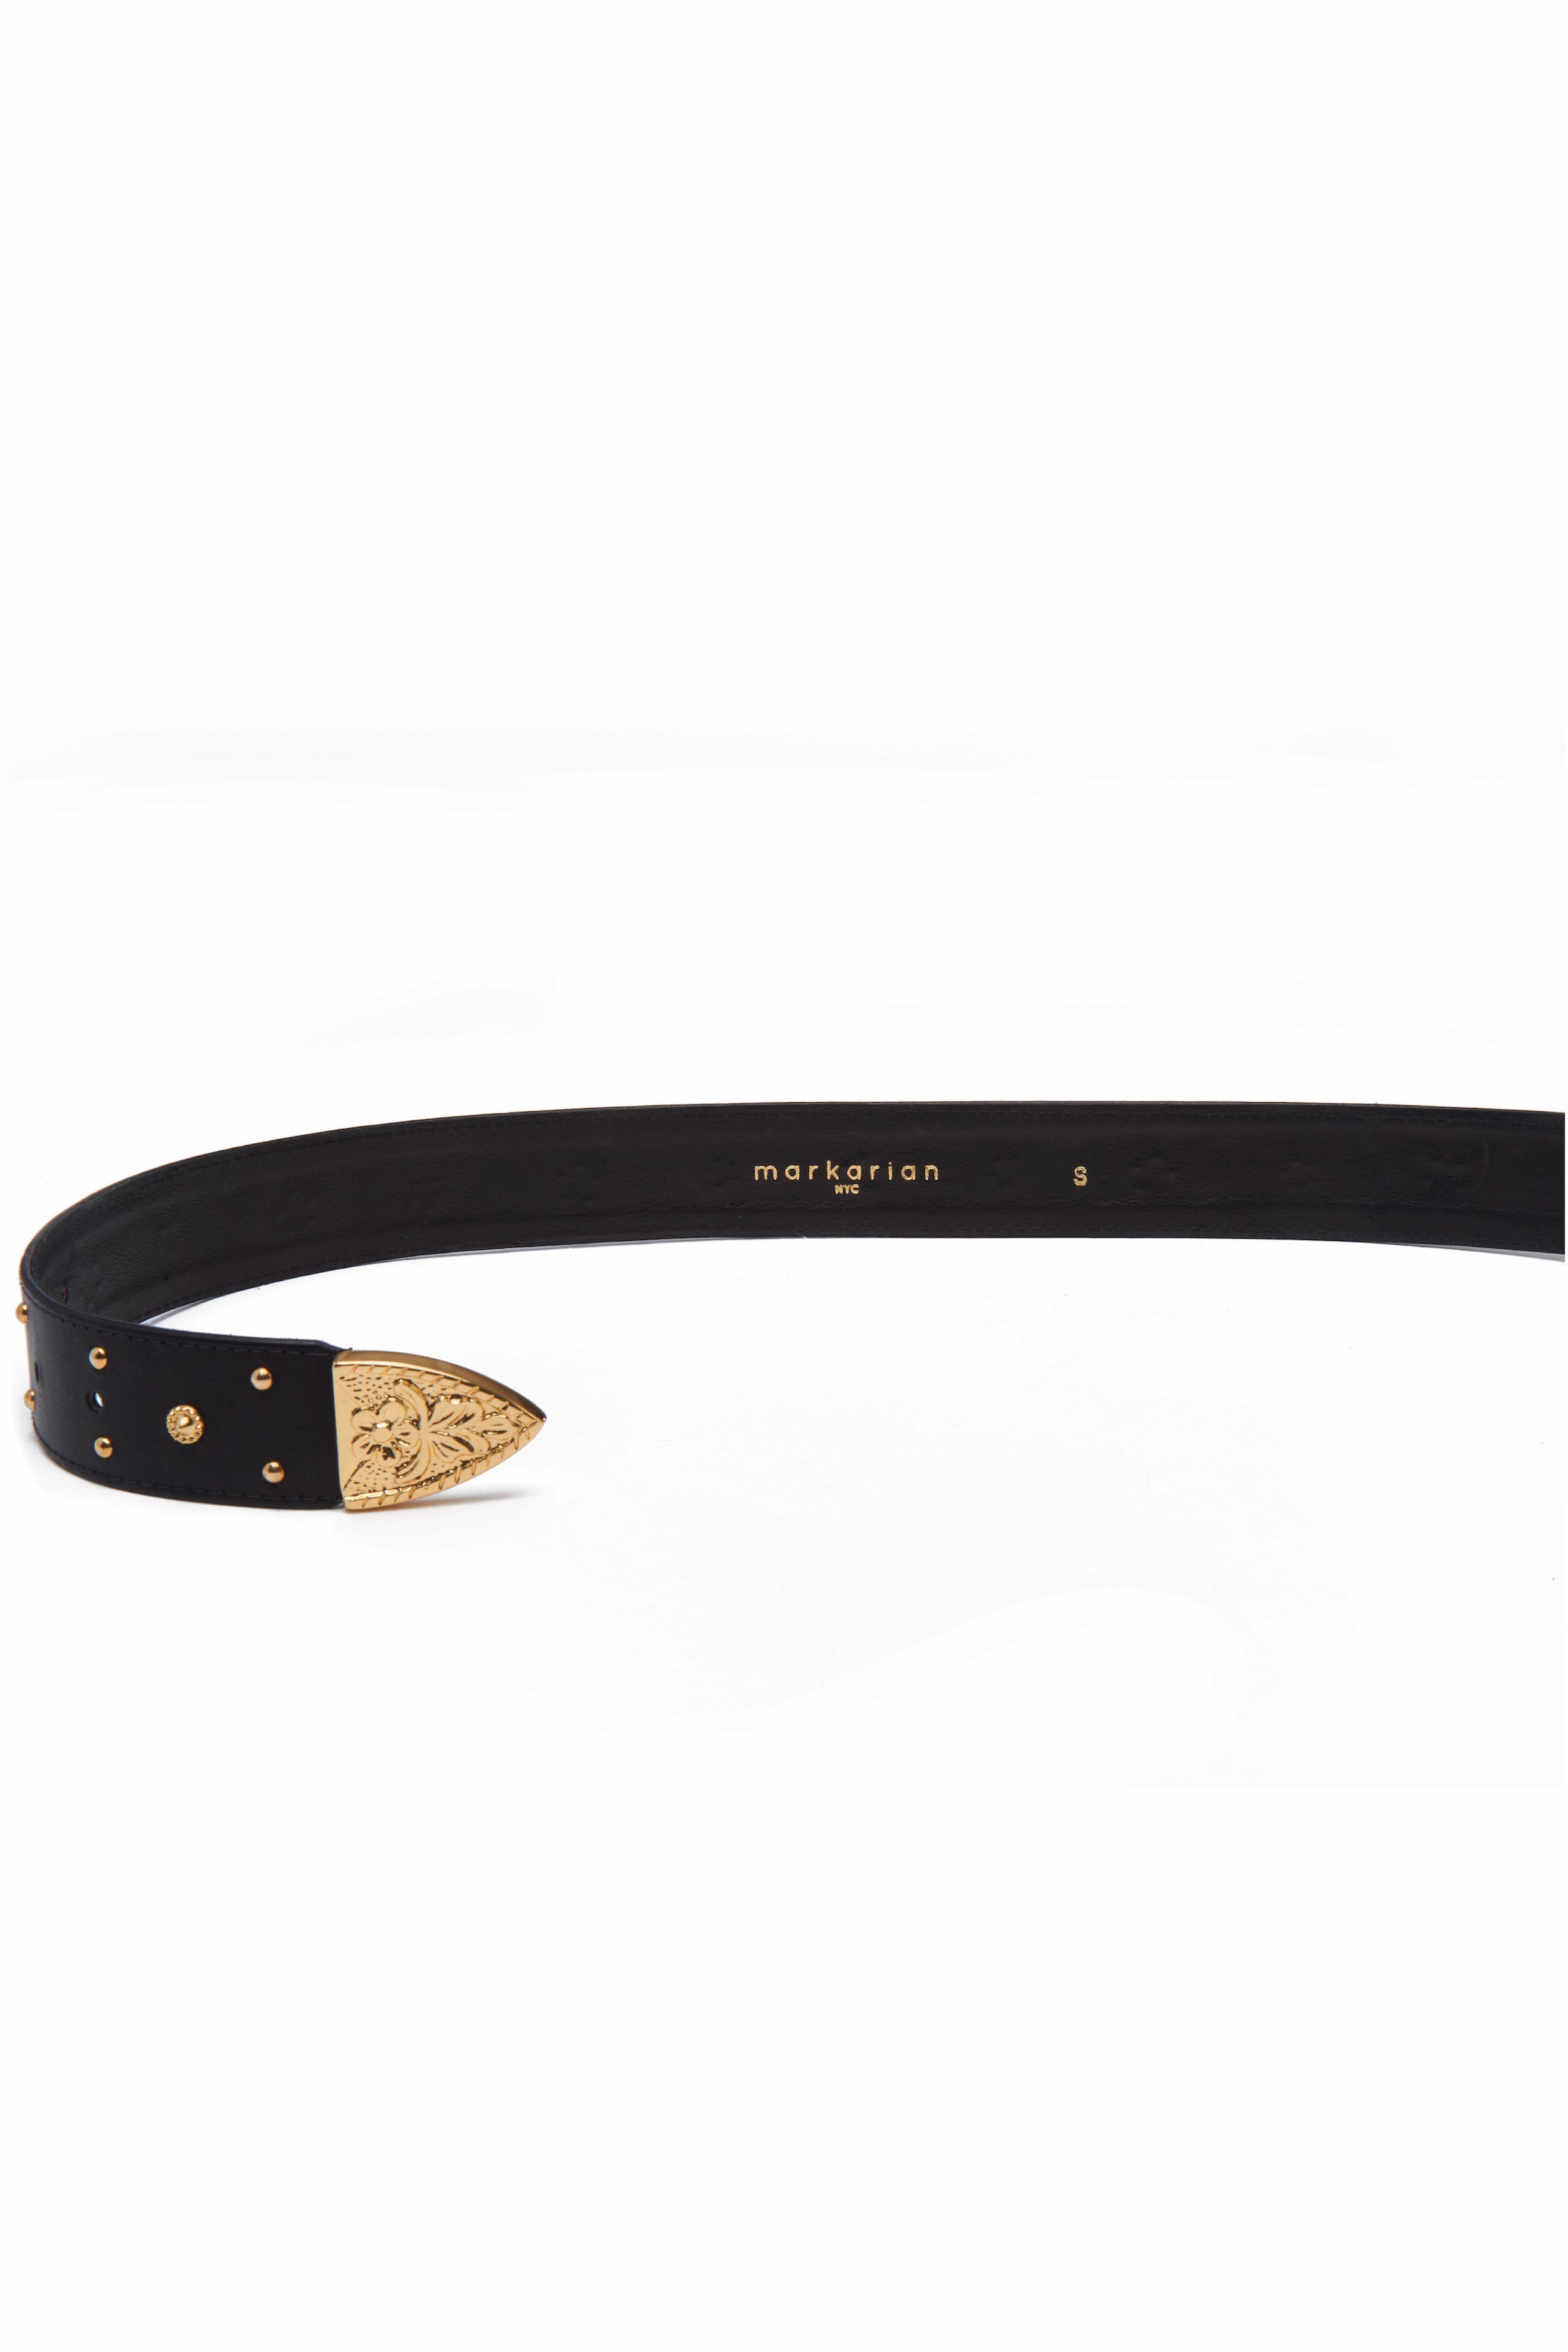 Serendipity Black Leather Belt with Engraved Gold Buckle and Stones